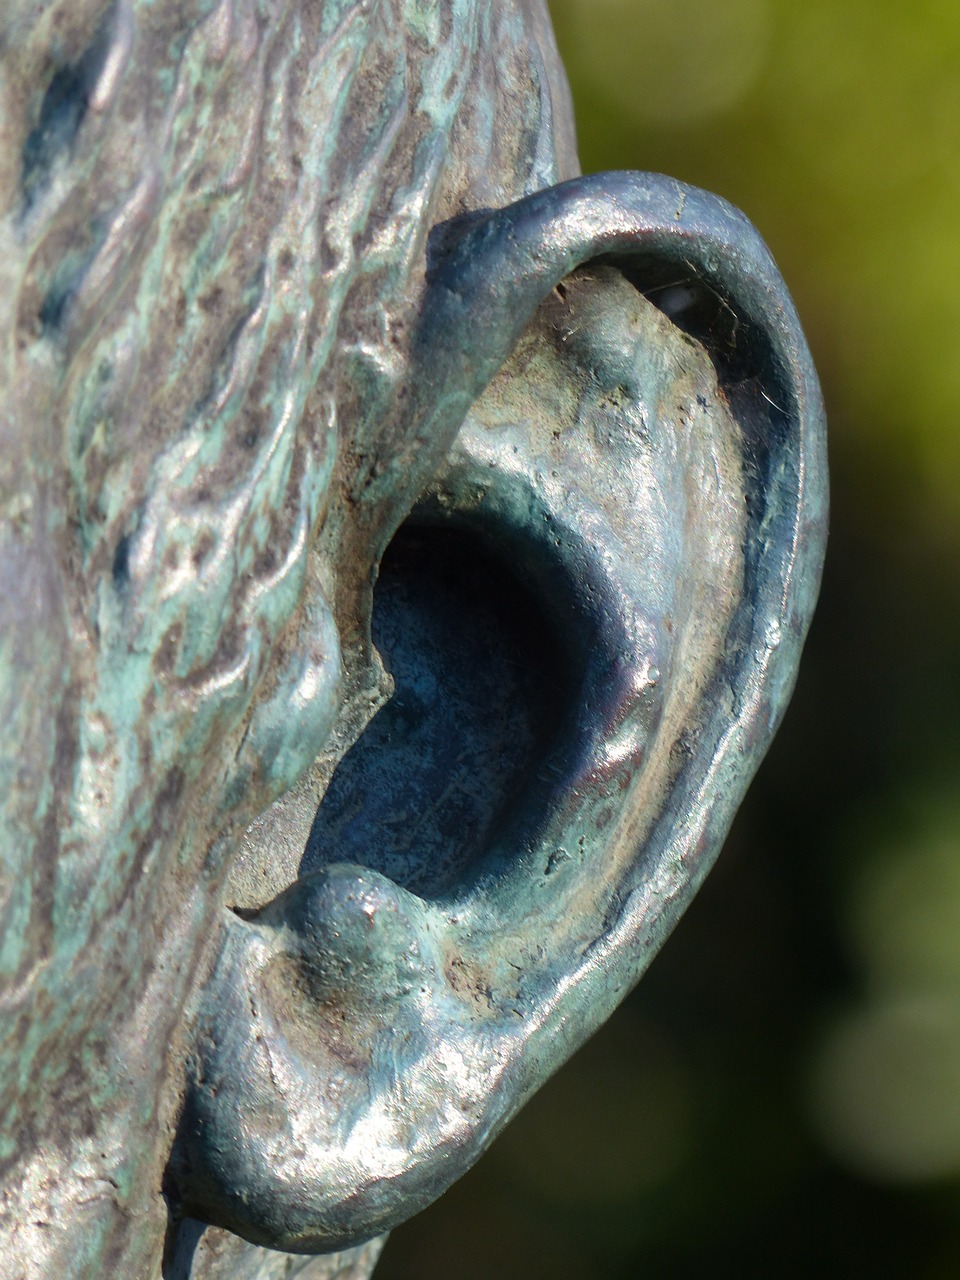 Image of a bronze ear